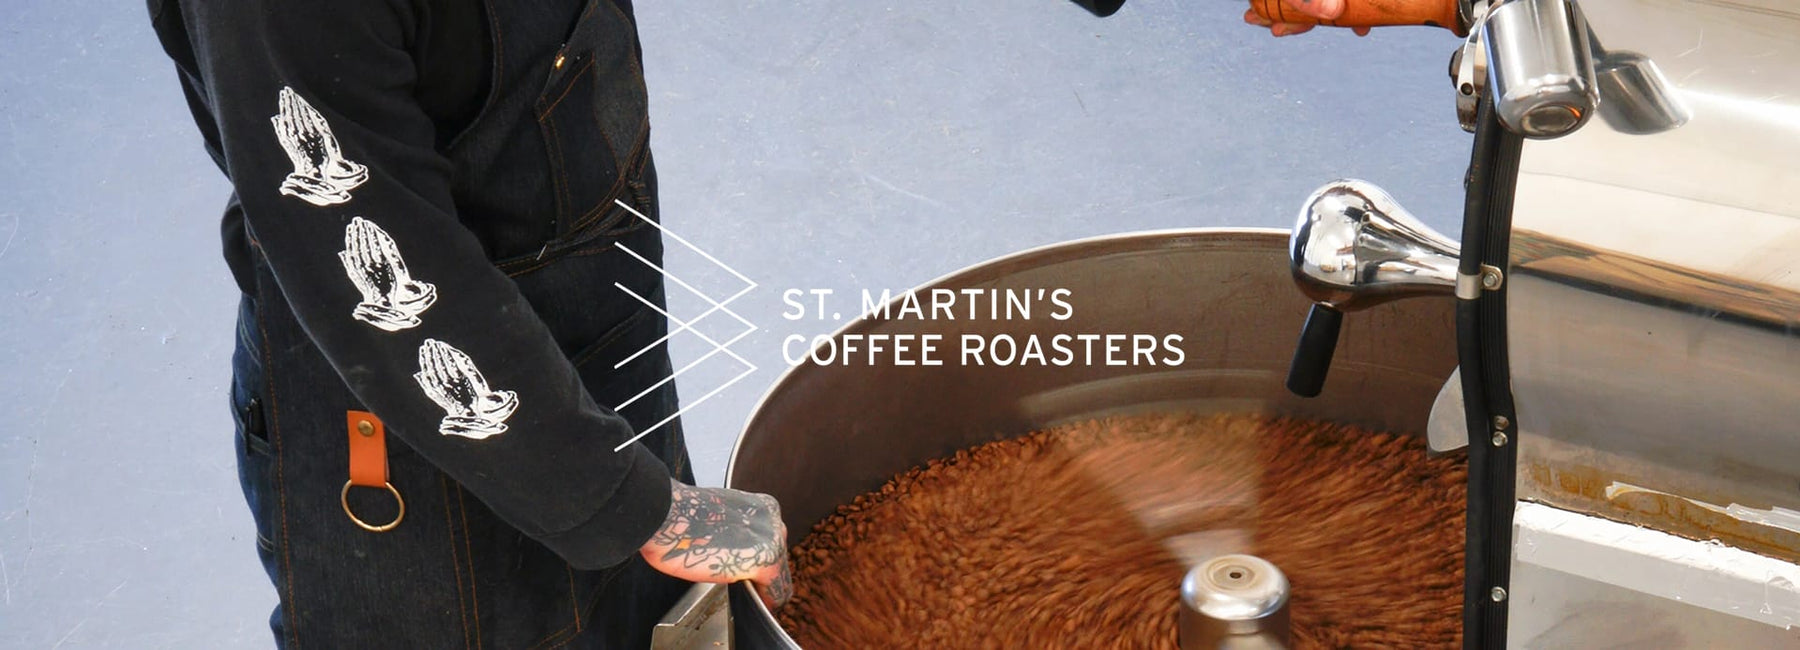 Coffee Roaster Introduction: St Martin’s Coffee Roasters